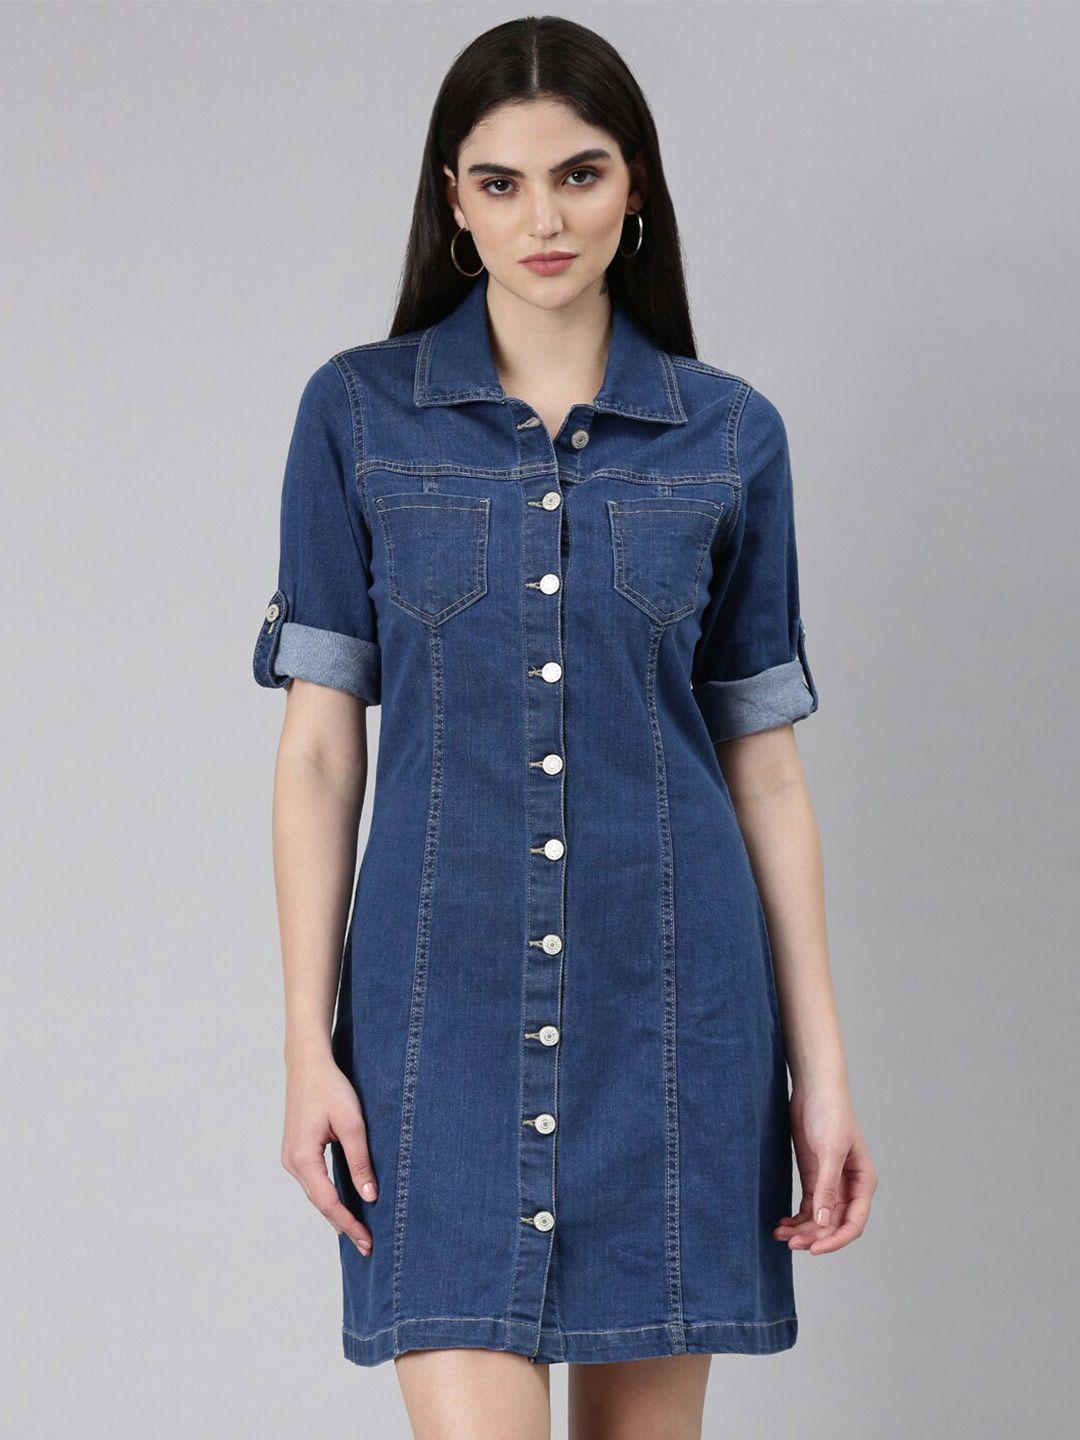 showoff-shirt-collar-roll-up-sleeves-cotton-shirt-style-dress